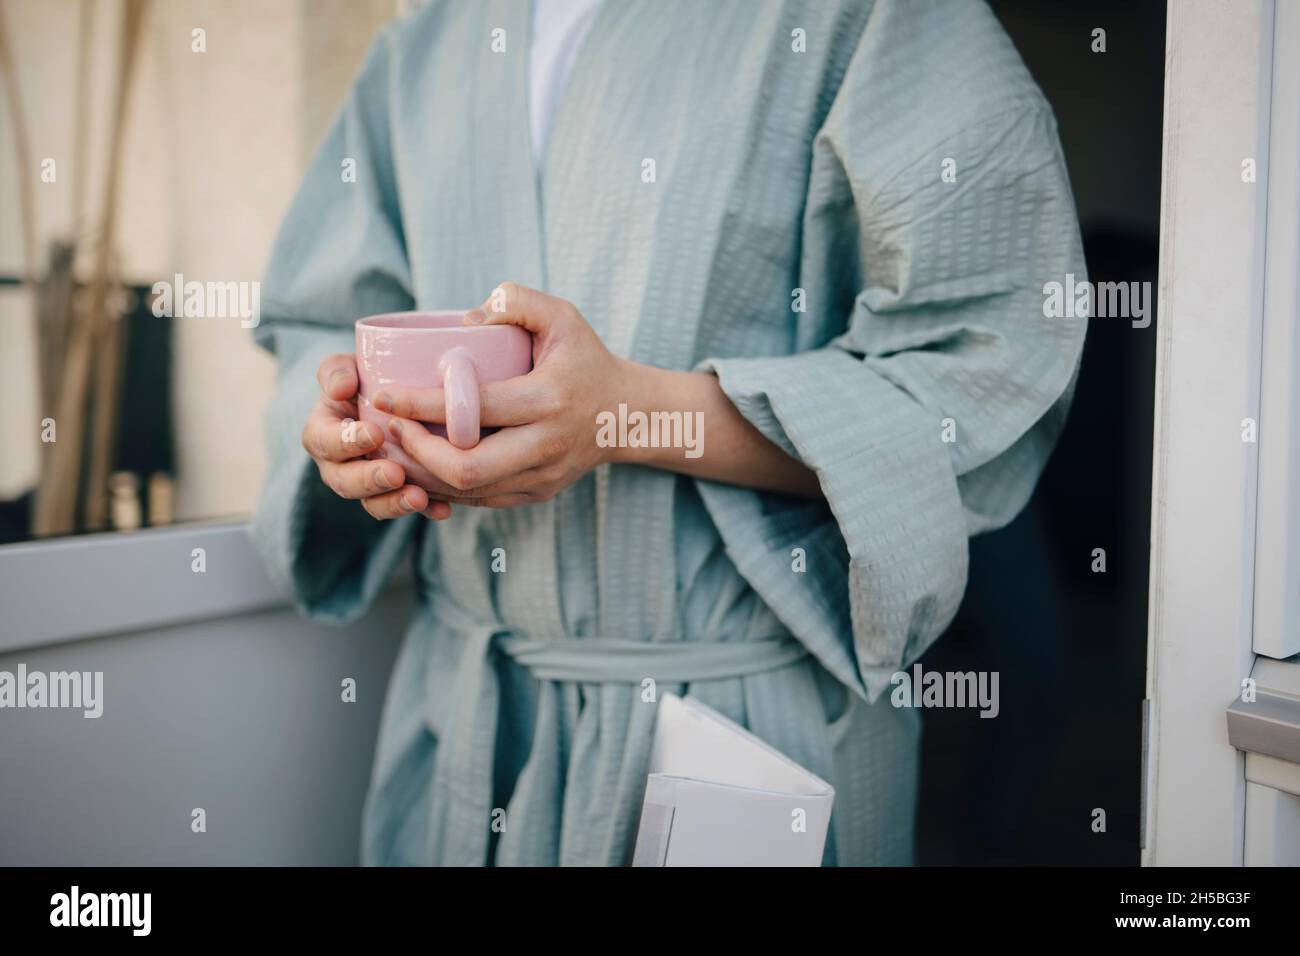 Midsection of woman holding coffee cup Stock Photo